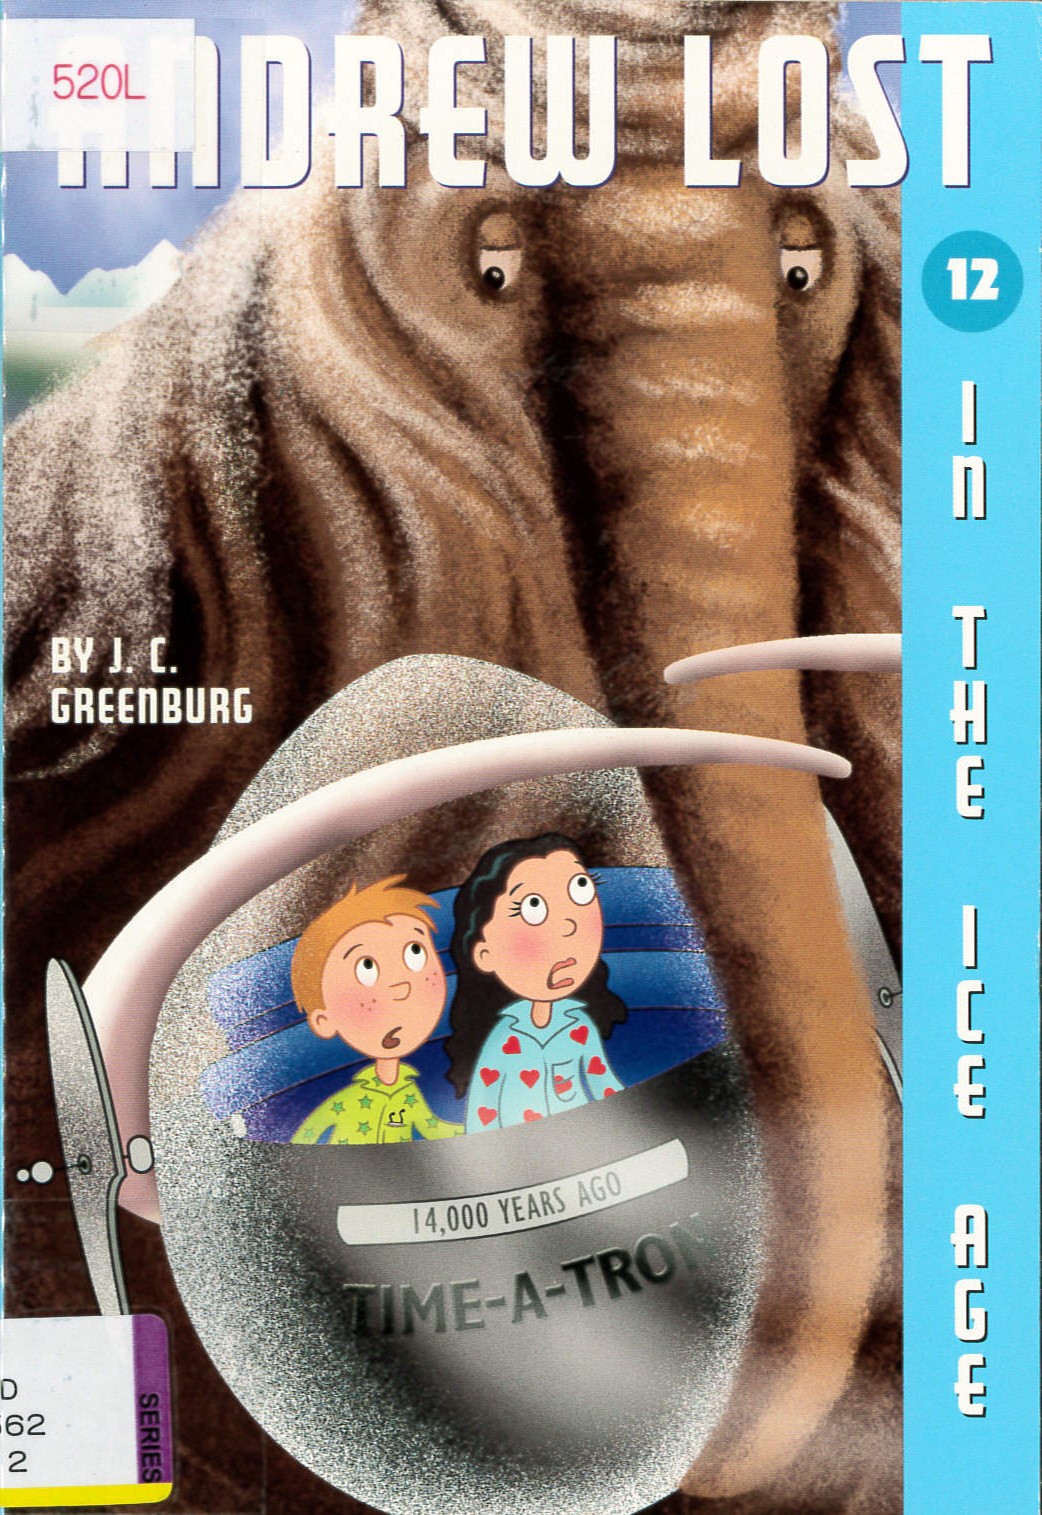 Andrew lost(12) : In the Ice Age /